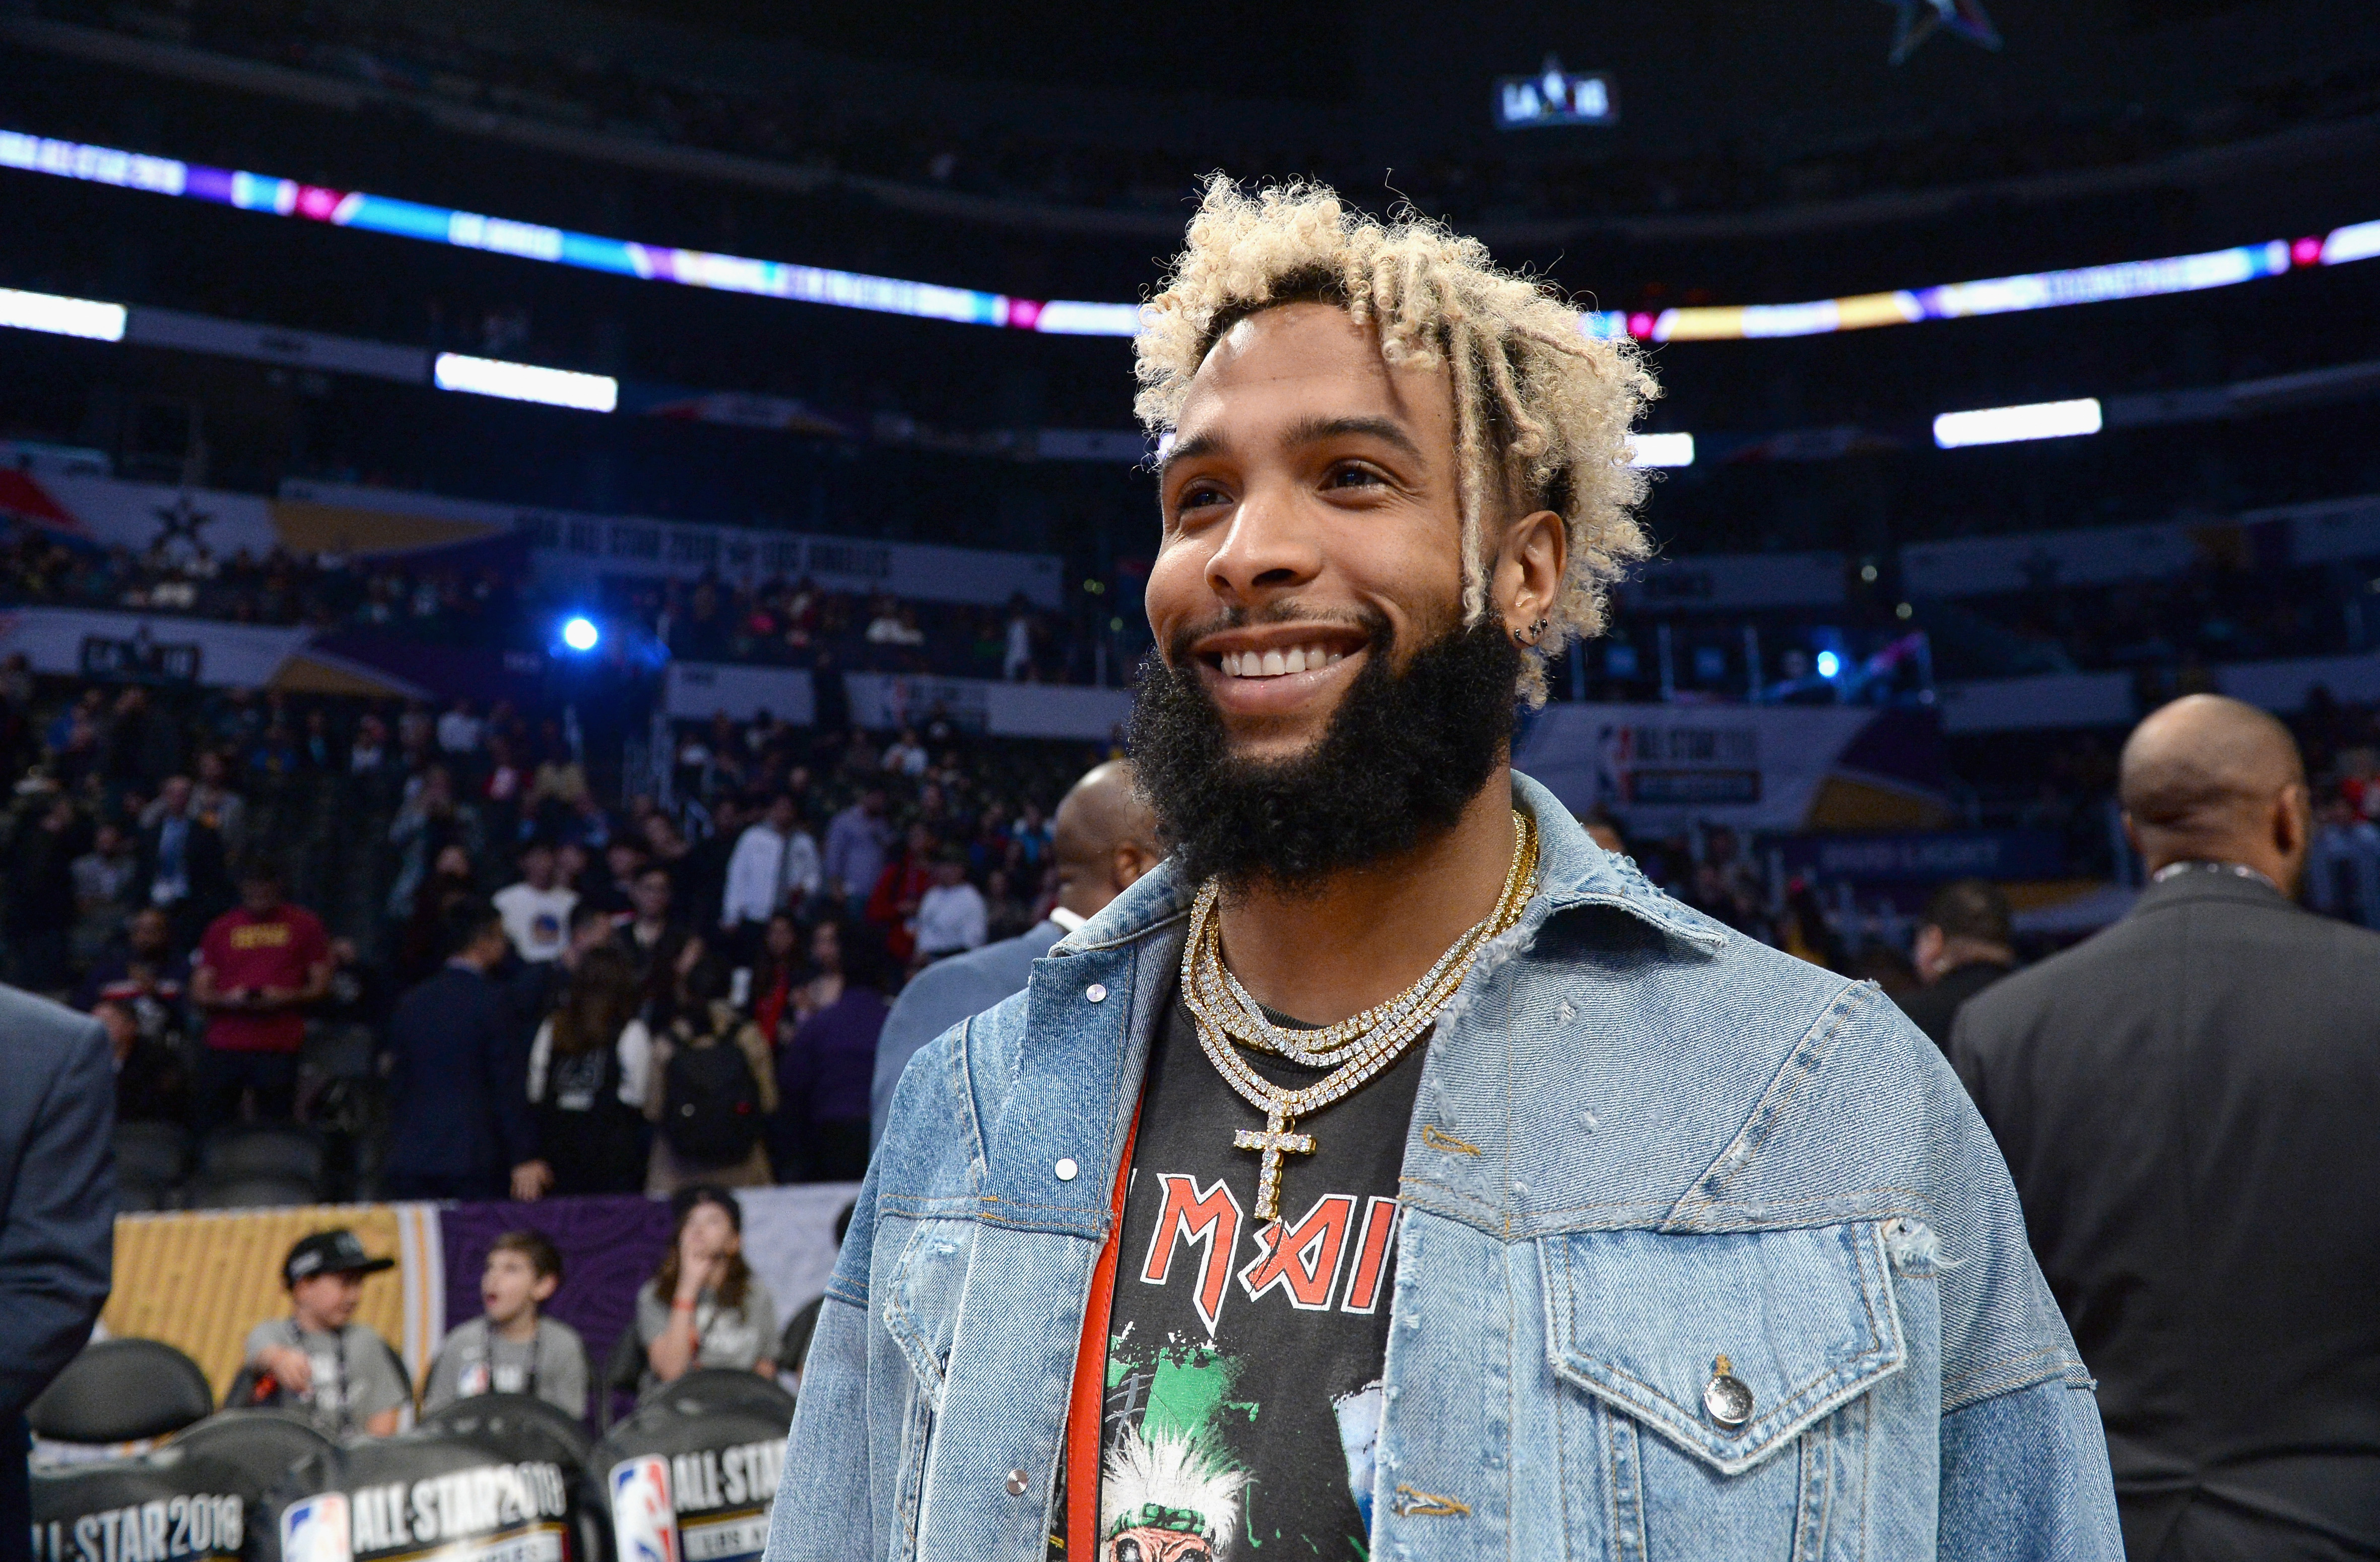 Odell Beckham Jr. attends the NBA All-Star Game 2018 at Staples Center on F...